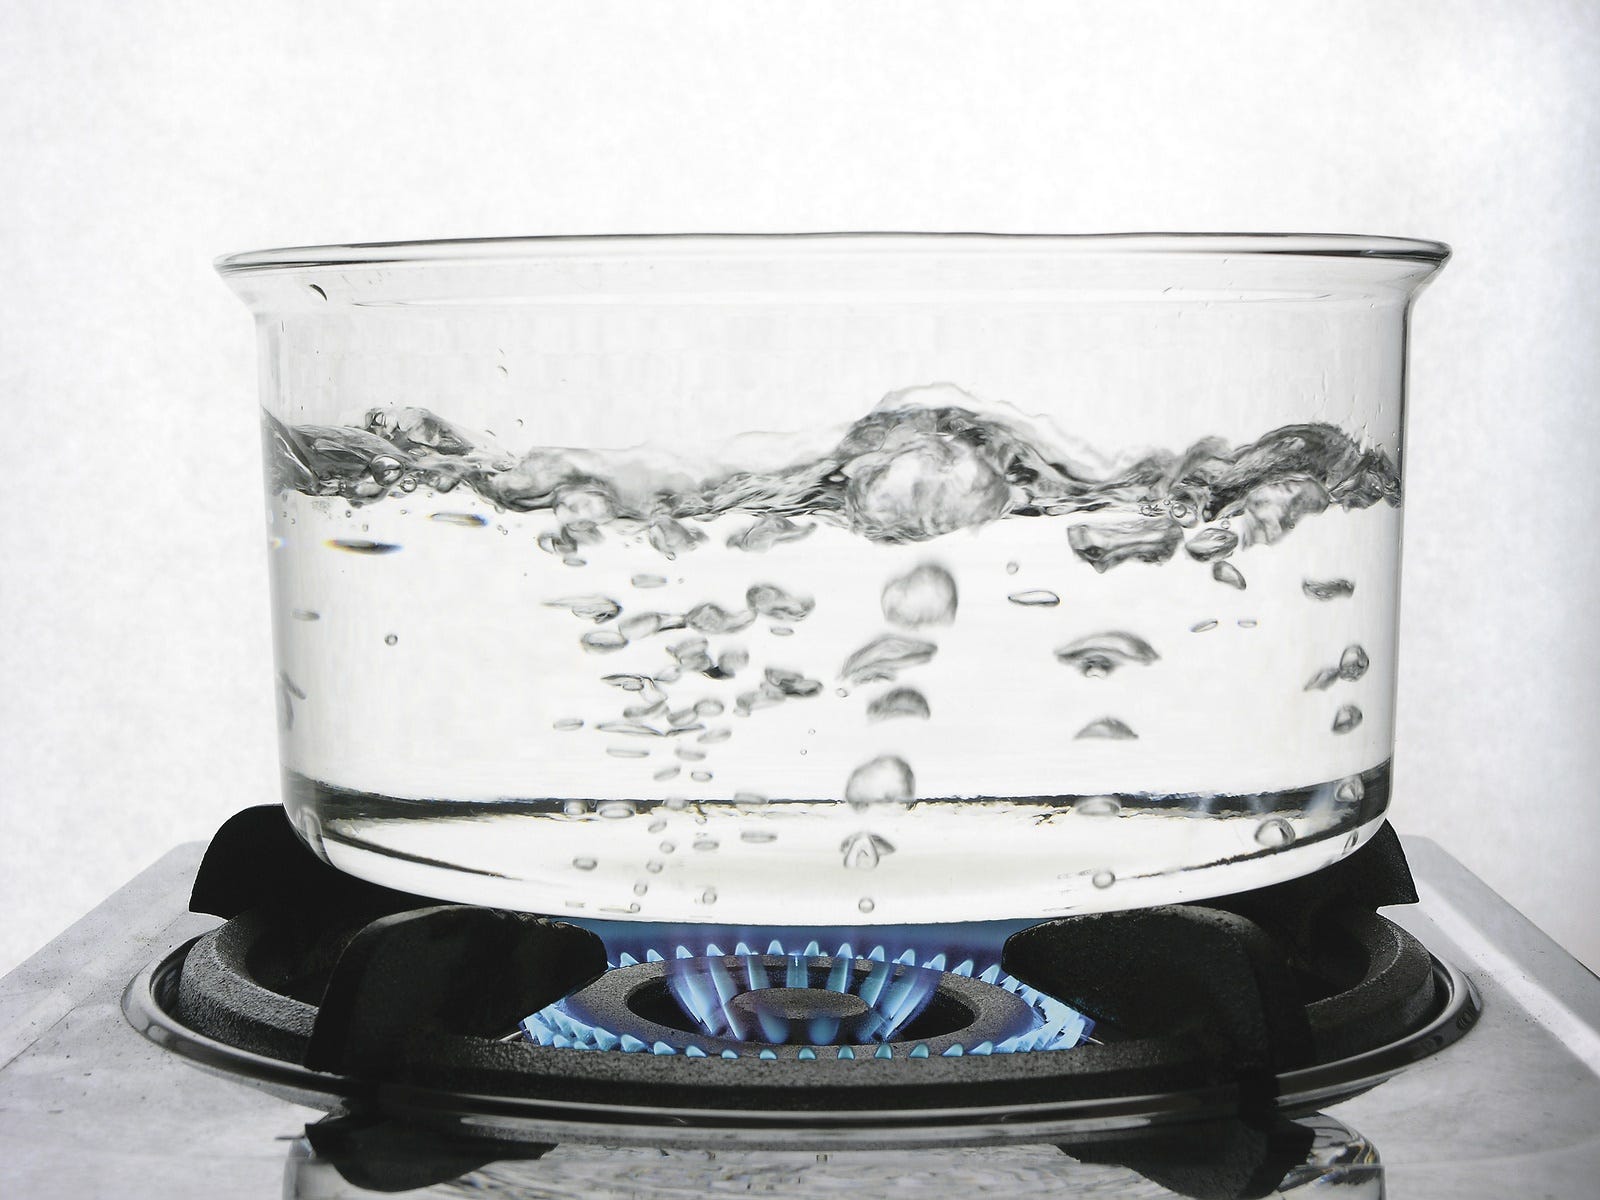 Boiling Point Of Water At 880 Torr: Understanding The Effects Of Pressure On Water’s Boiling Temperature